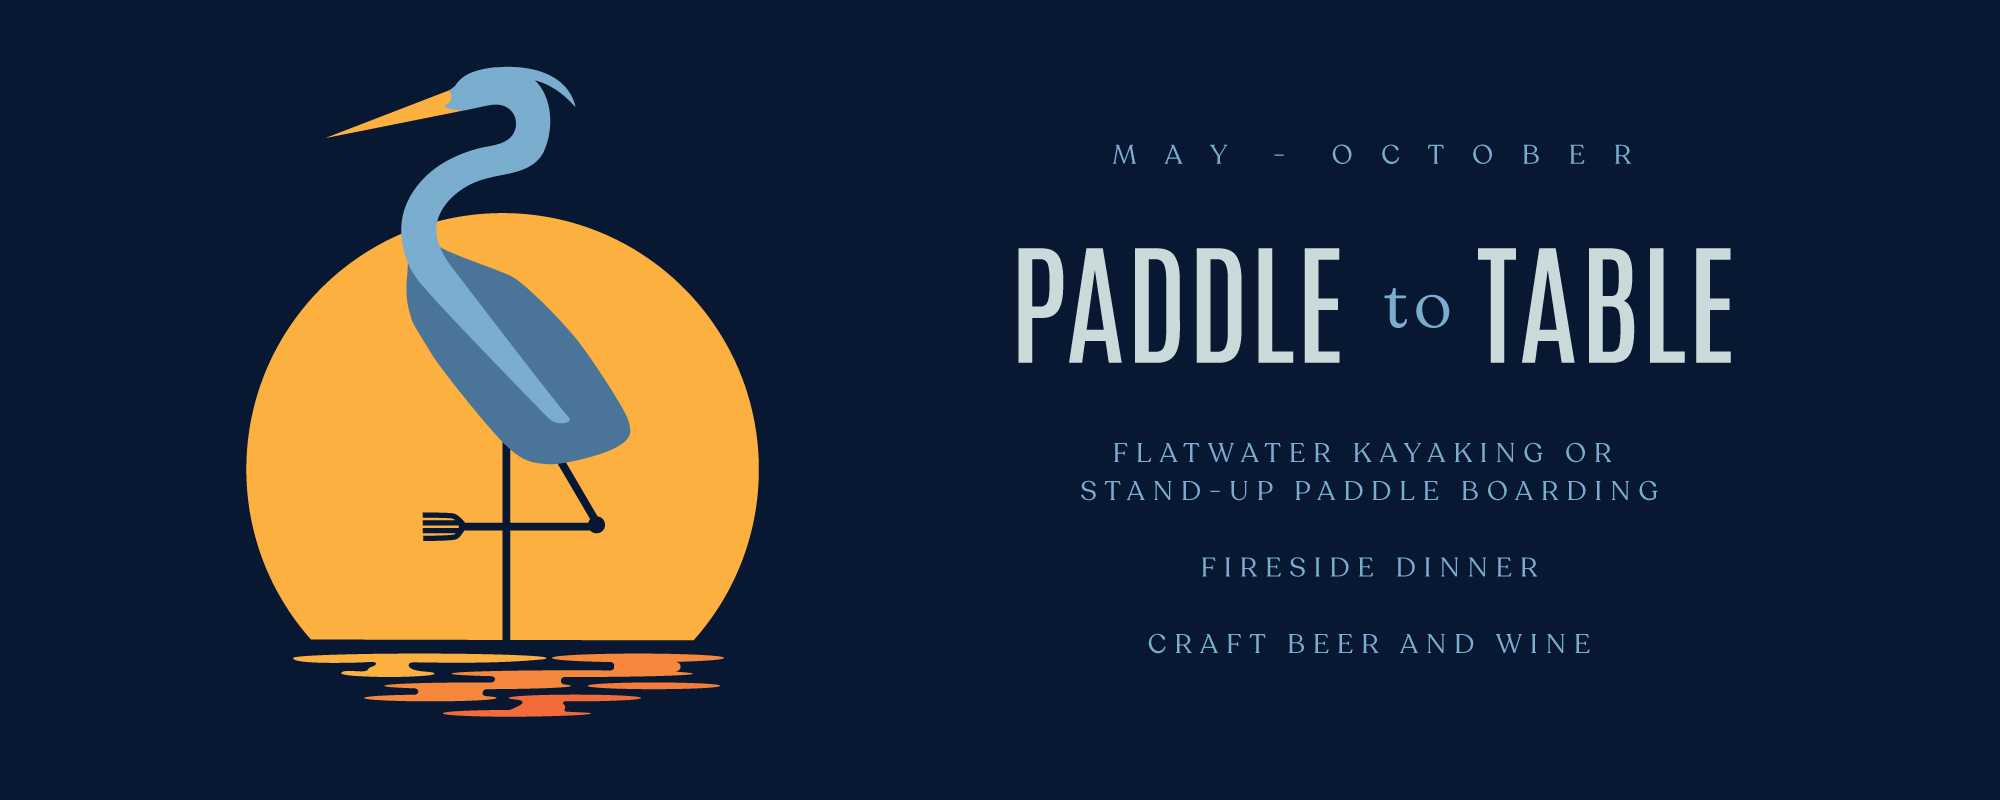 2021 Paddle to Table